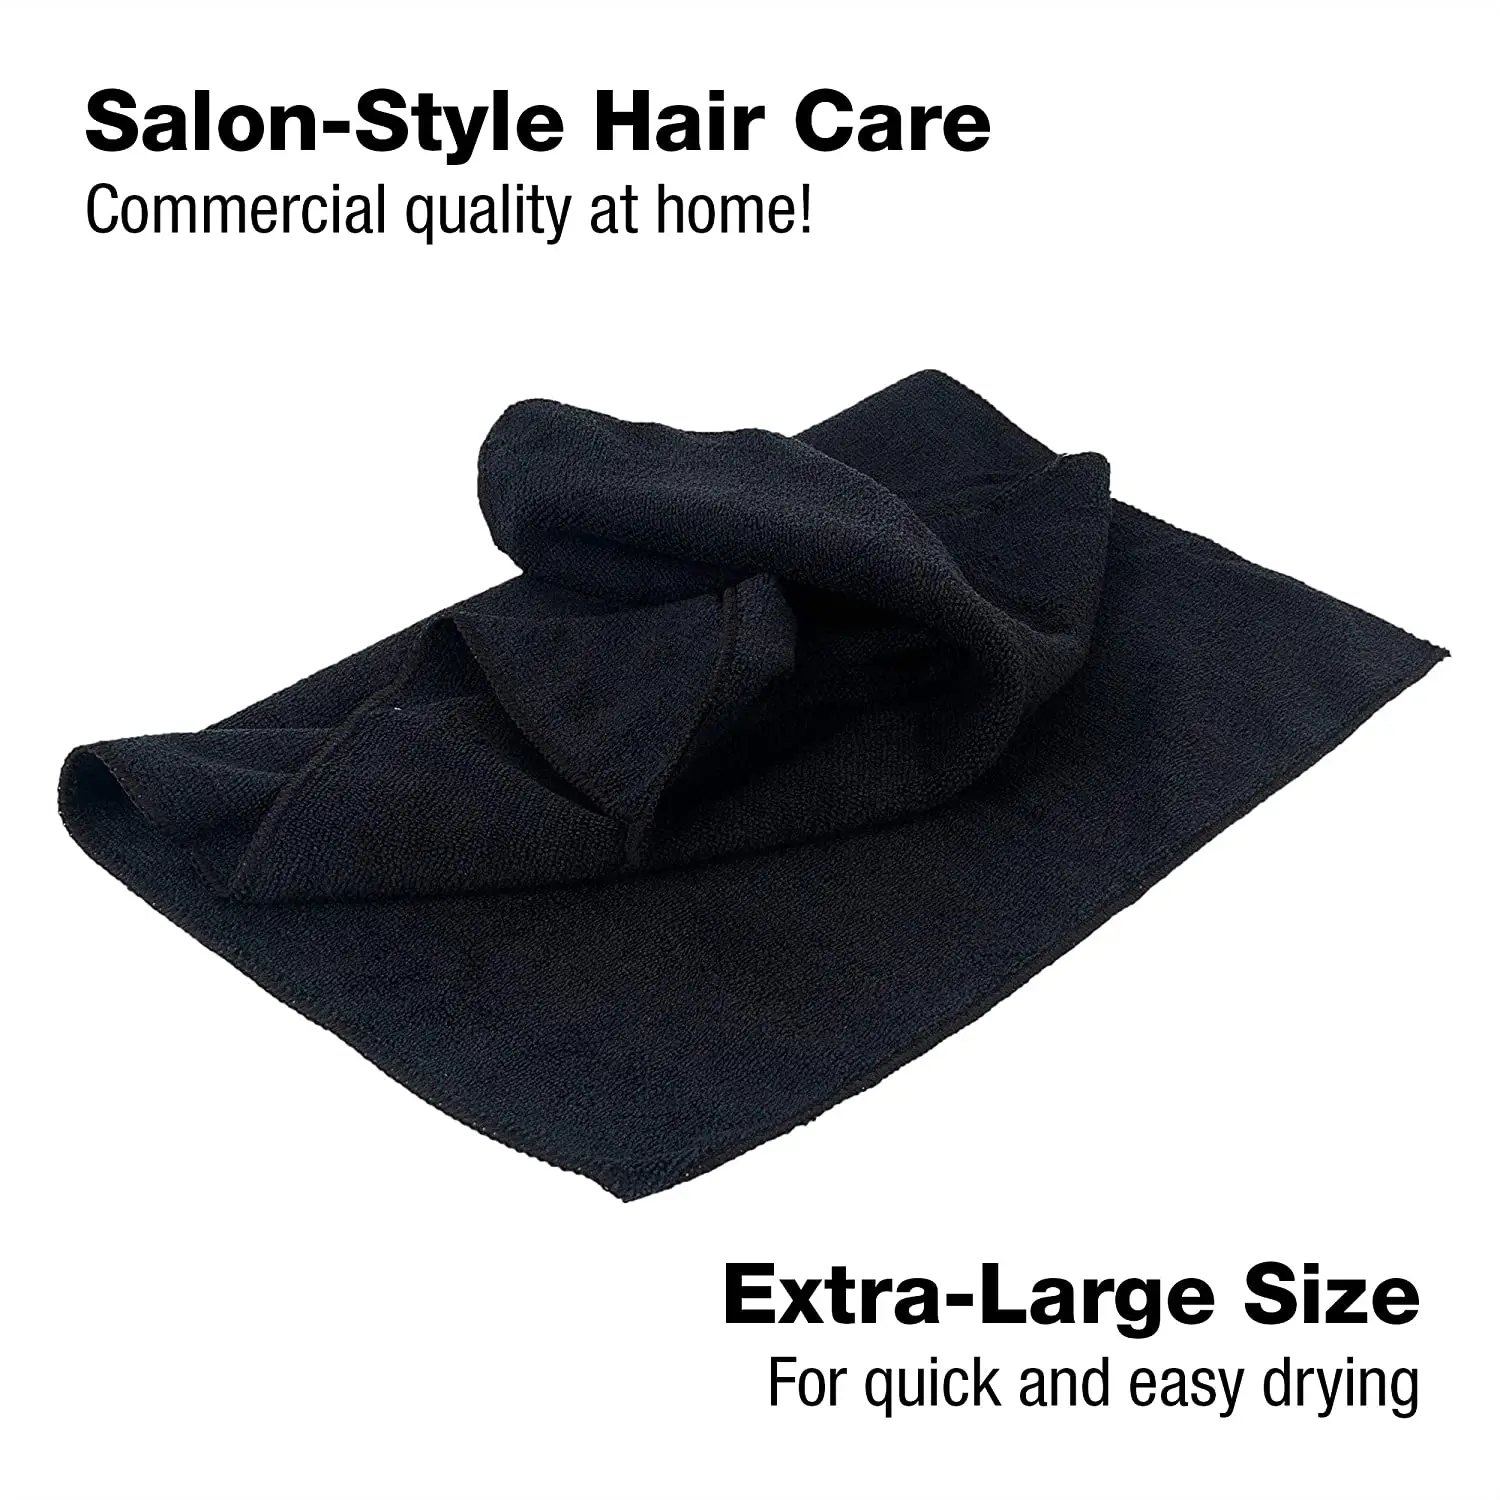 https://ae01.alicdn.com/kf/S641a3cf4e2f245d8930b8f19c8cfc73eb/Black-Home-Microfiber-Salon-Hair-Drying-Towel-Guest-Used-Hand-Towels-For-Hair-Stylist-3-Pack.jpg